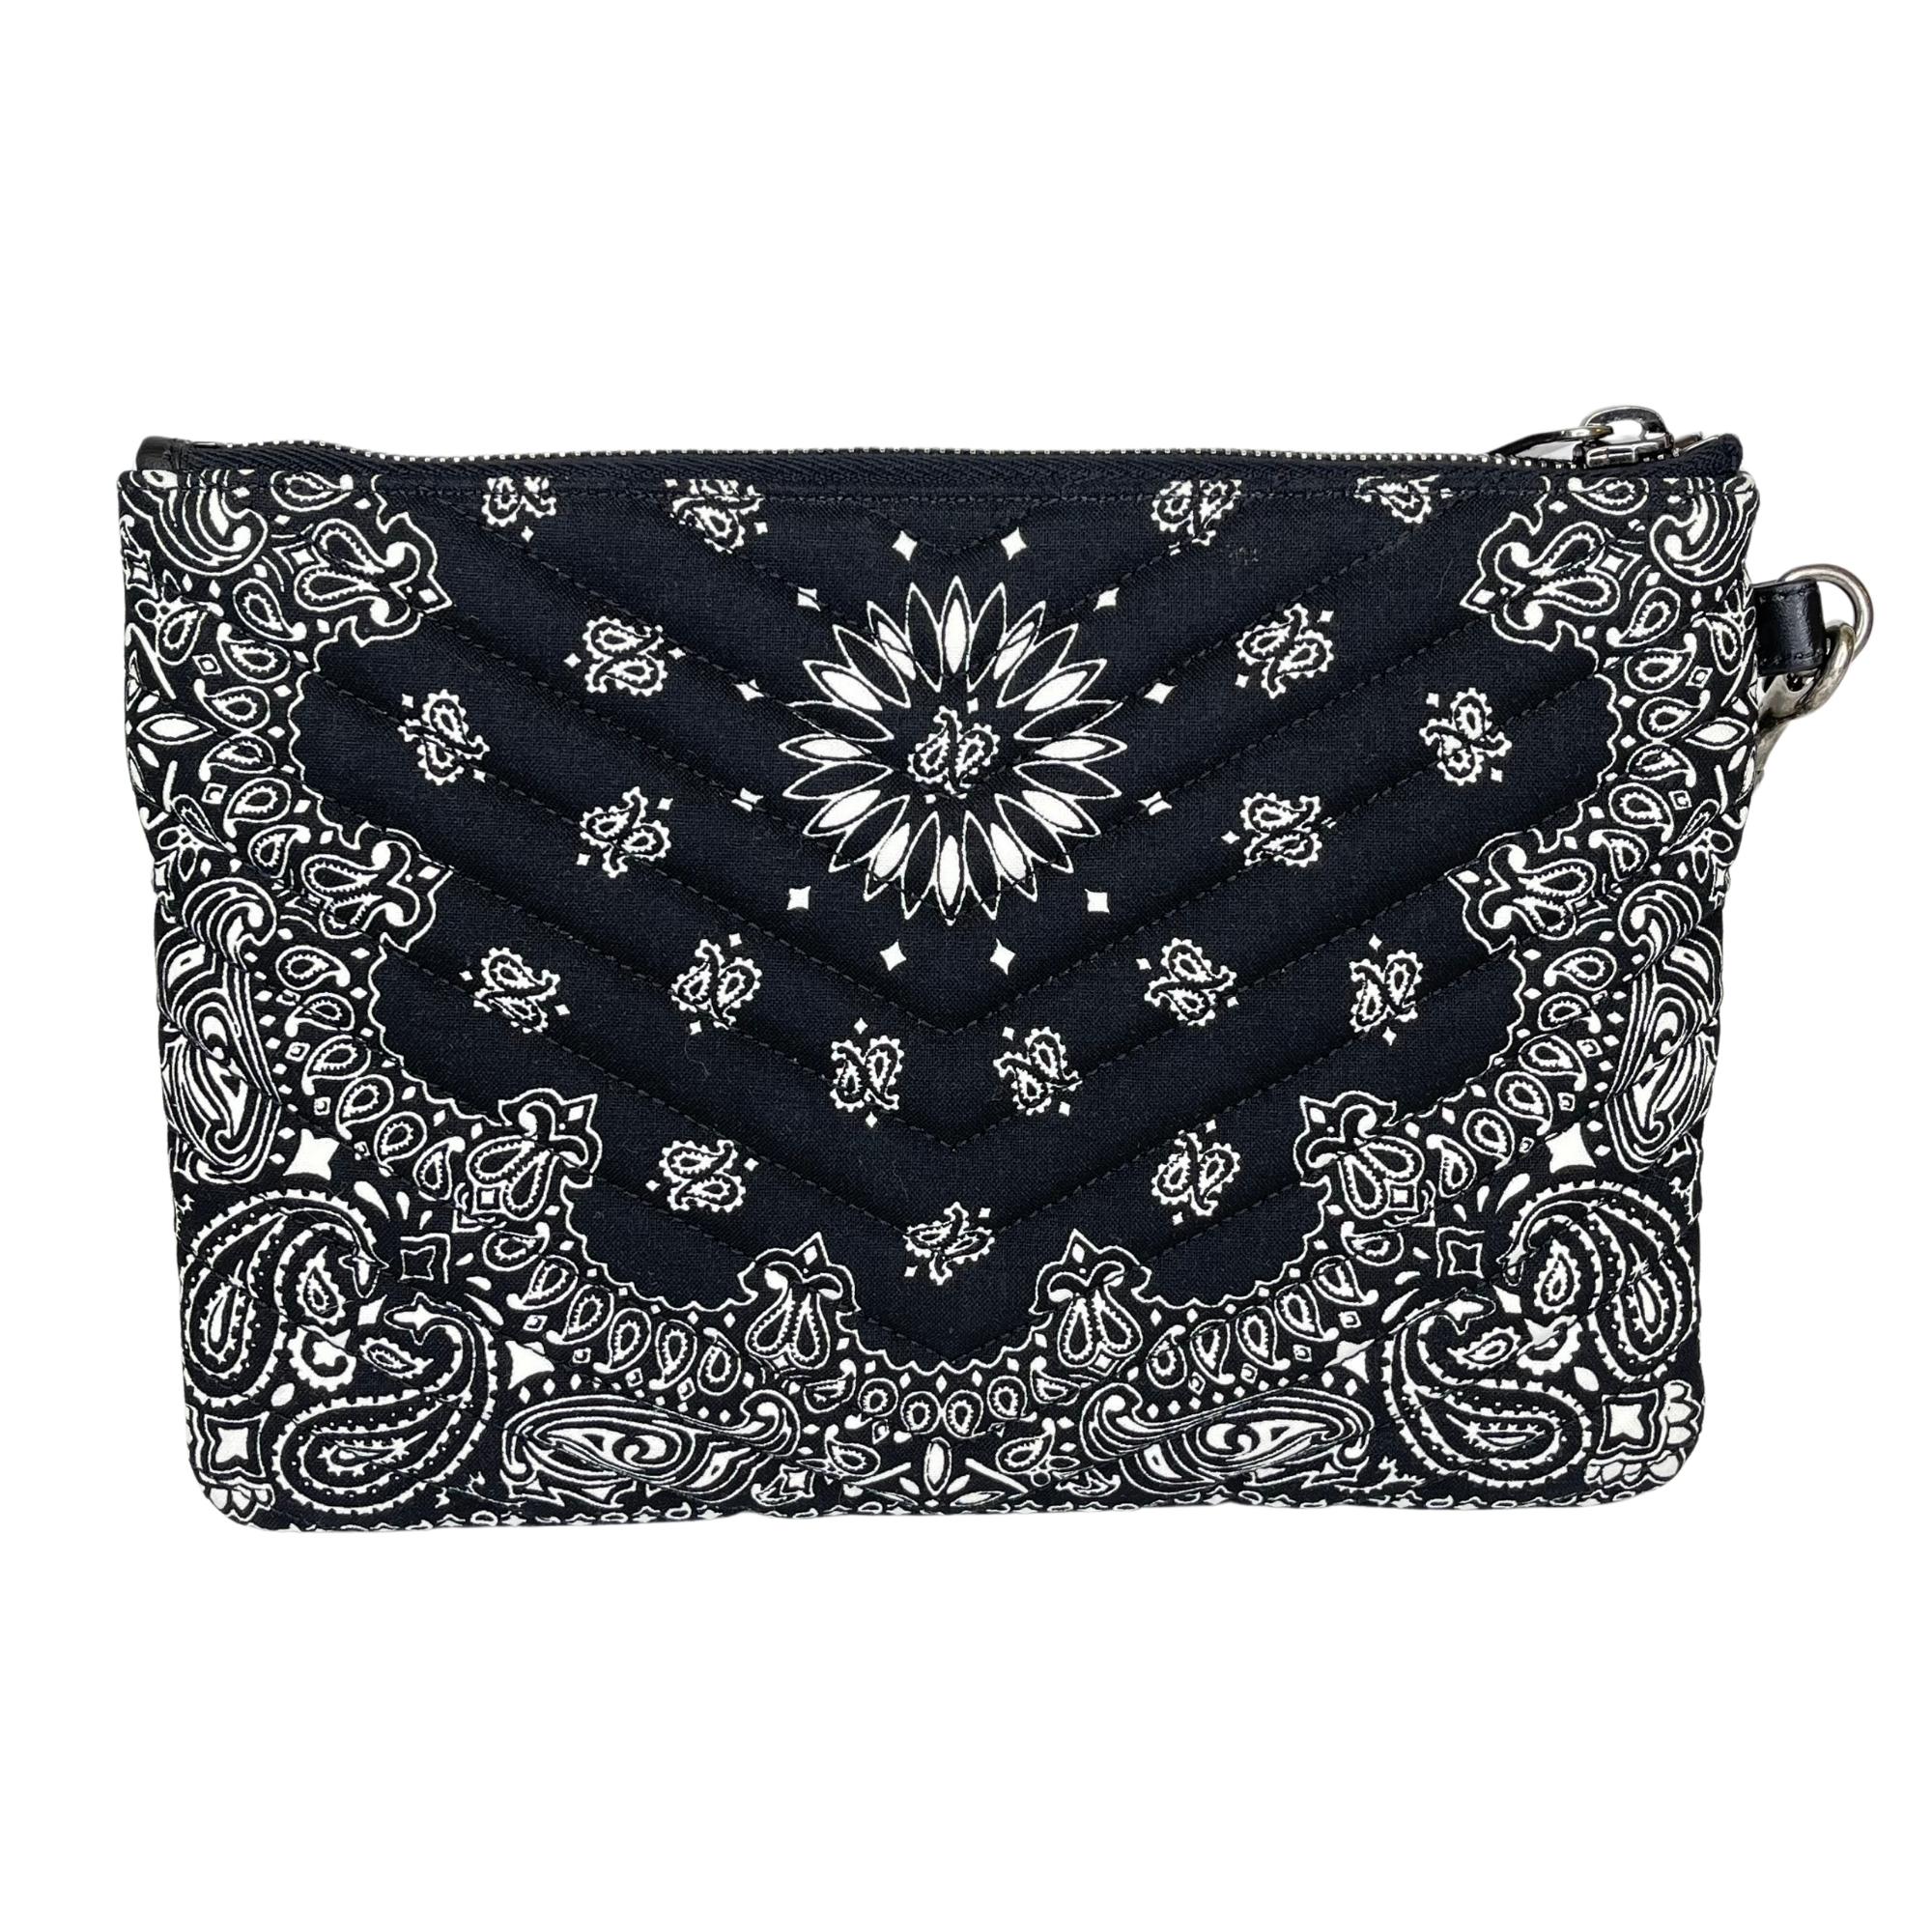 This pouch bag is made with black fabric with a paisley bandana print in white. The pouch features a polished aged silver YSL monogram logo at the front, an attachable black leather wristlet strap, top zip closure and an interior with black fabric